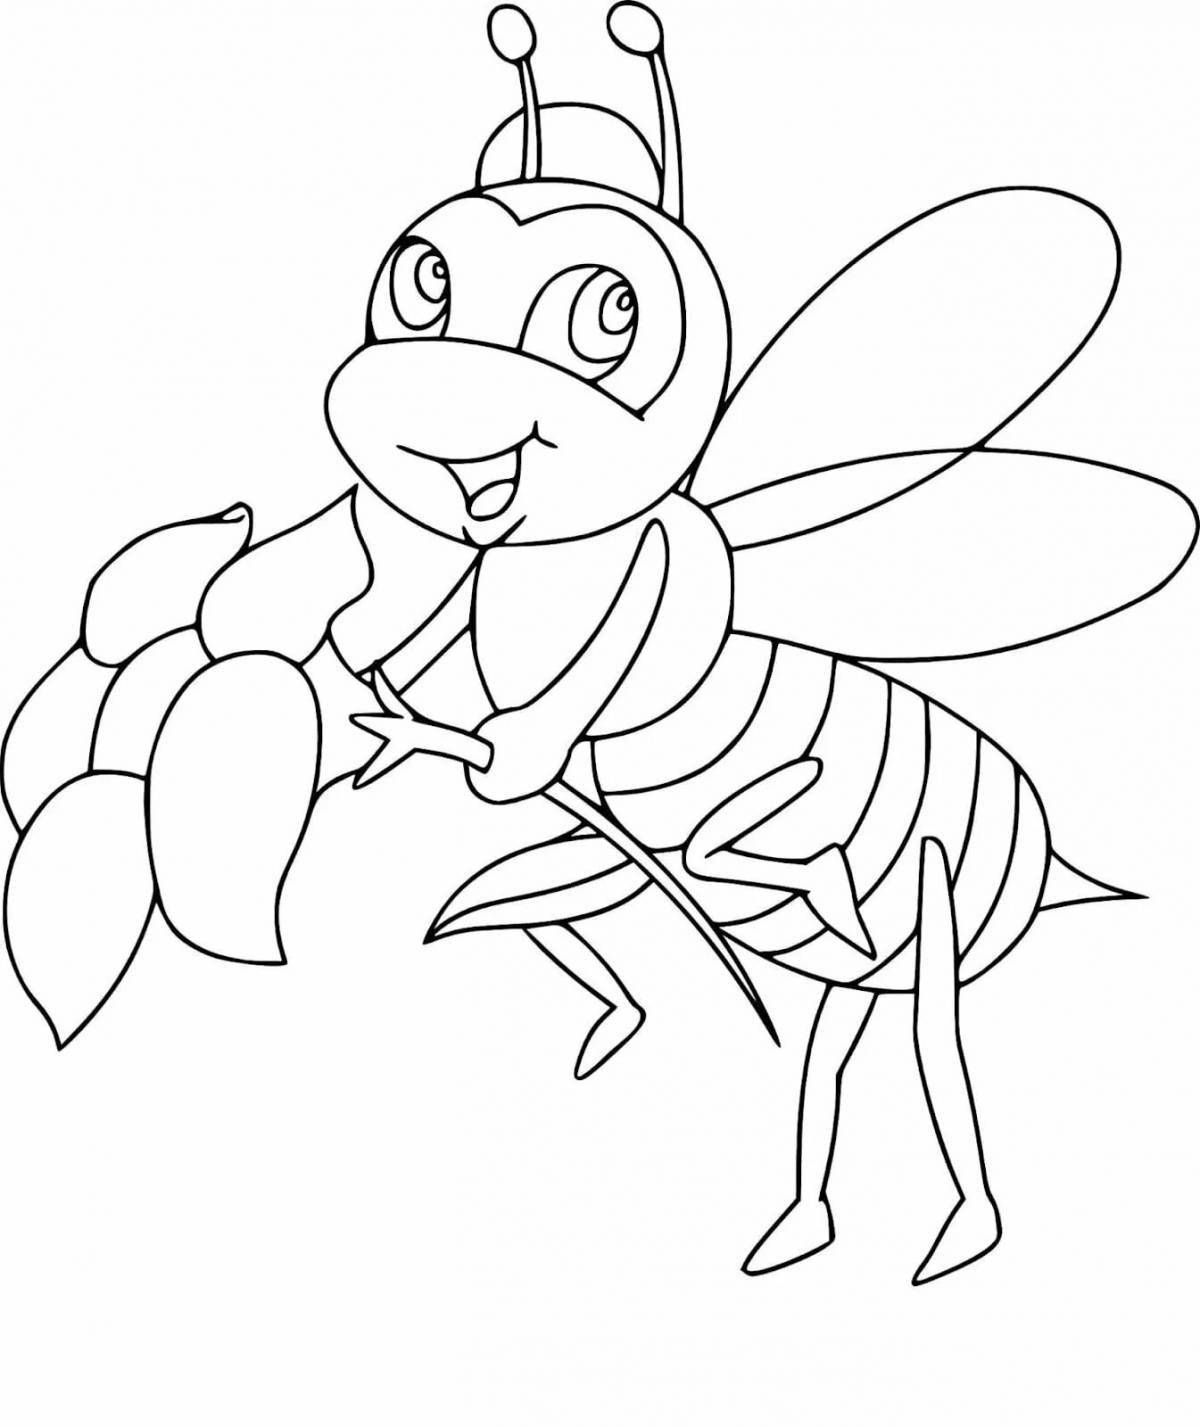 Colorful bee coloring page for 6-7 year olds